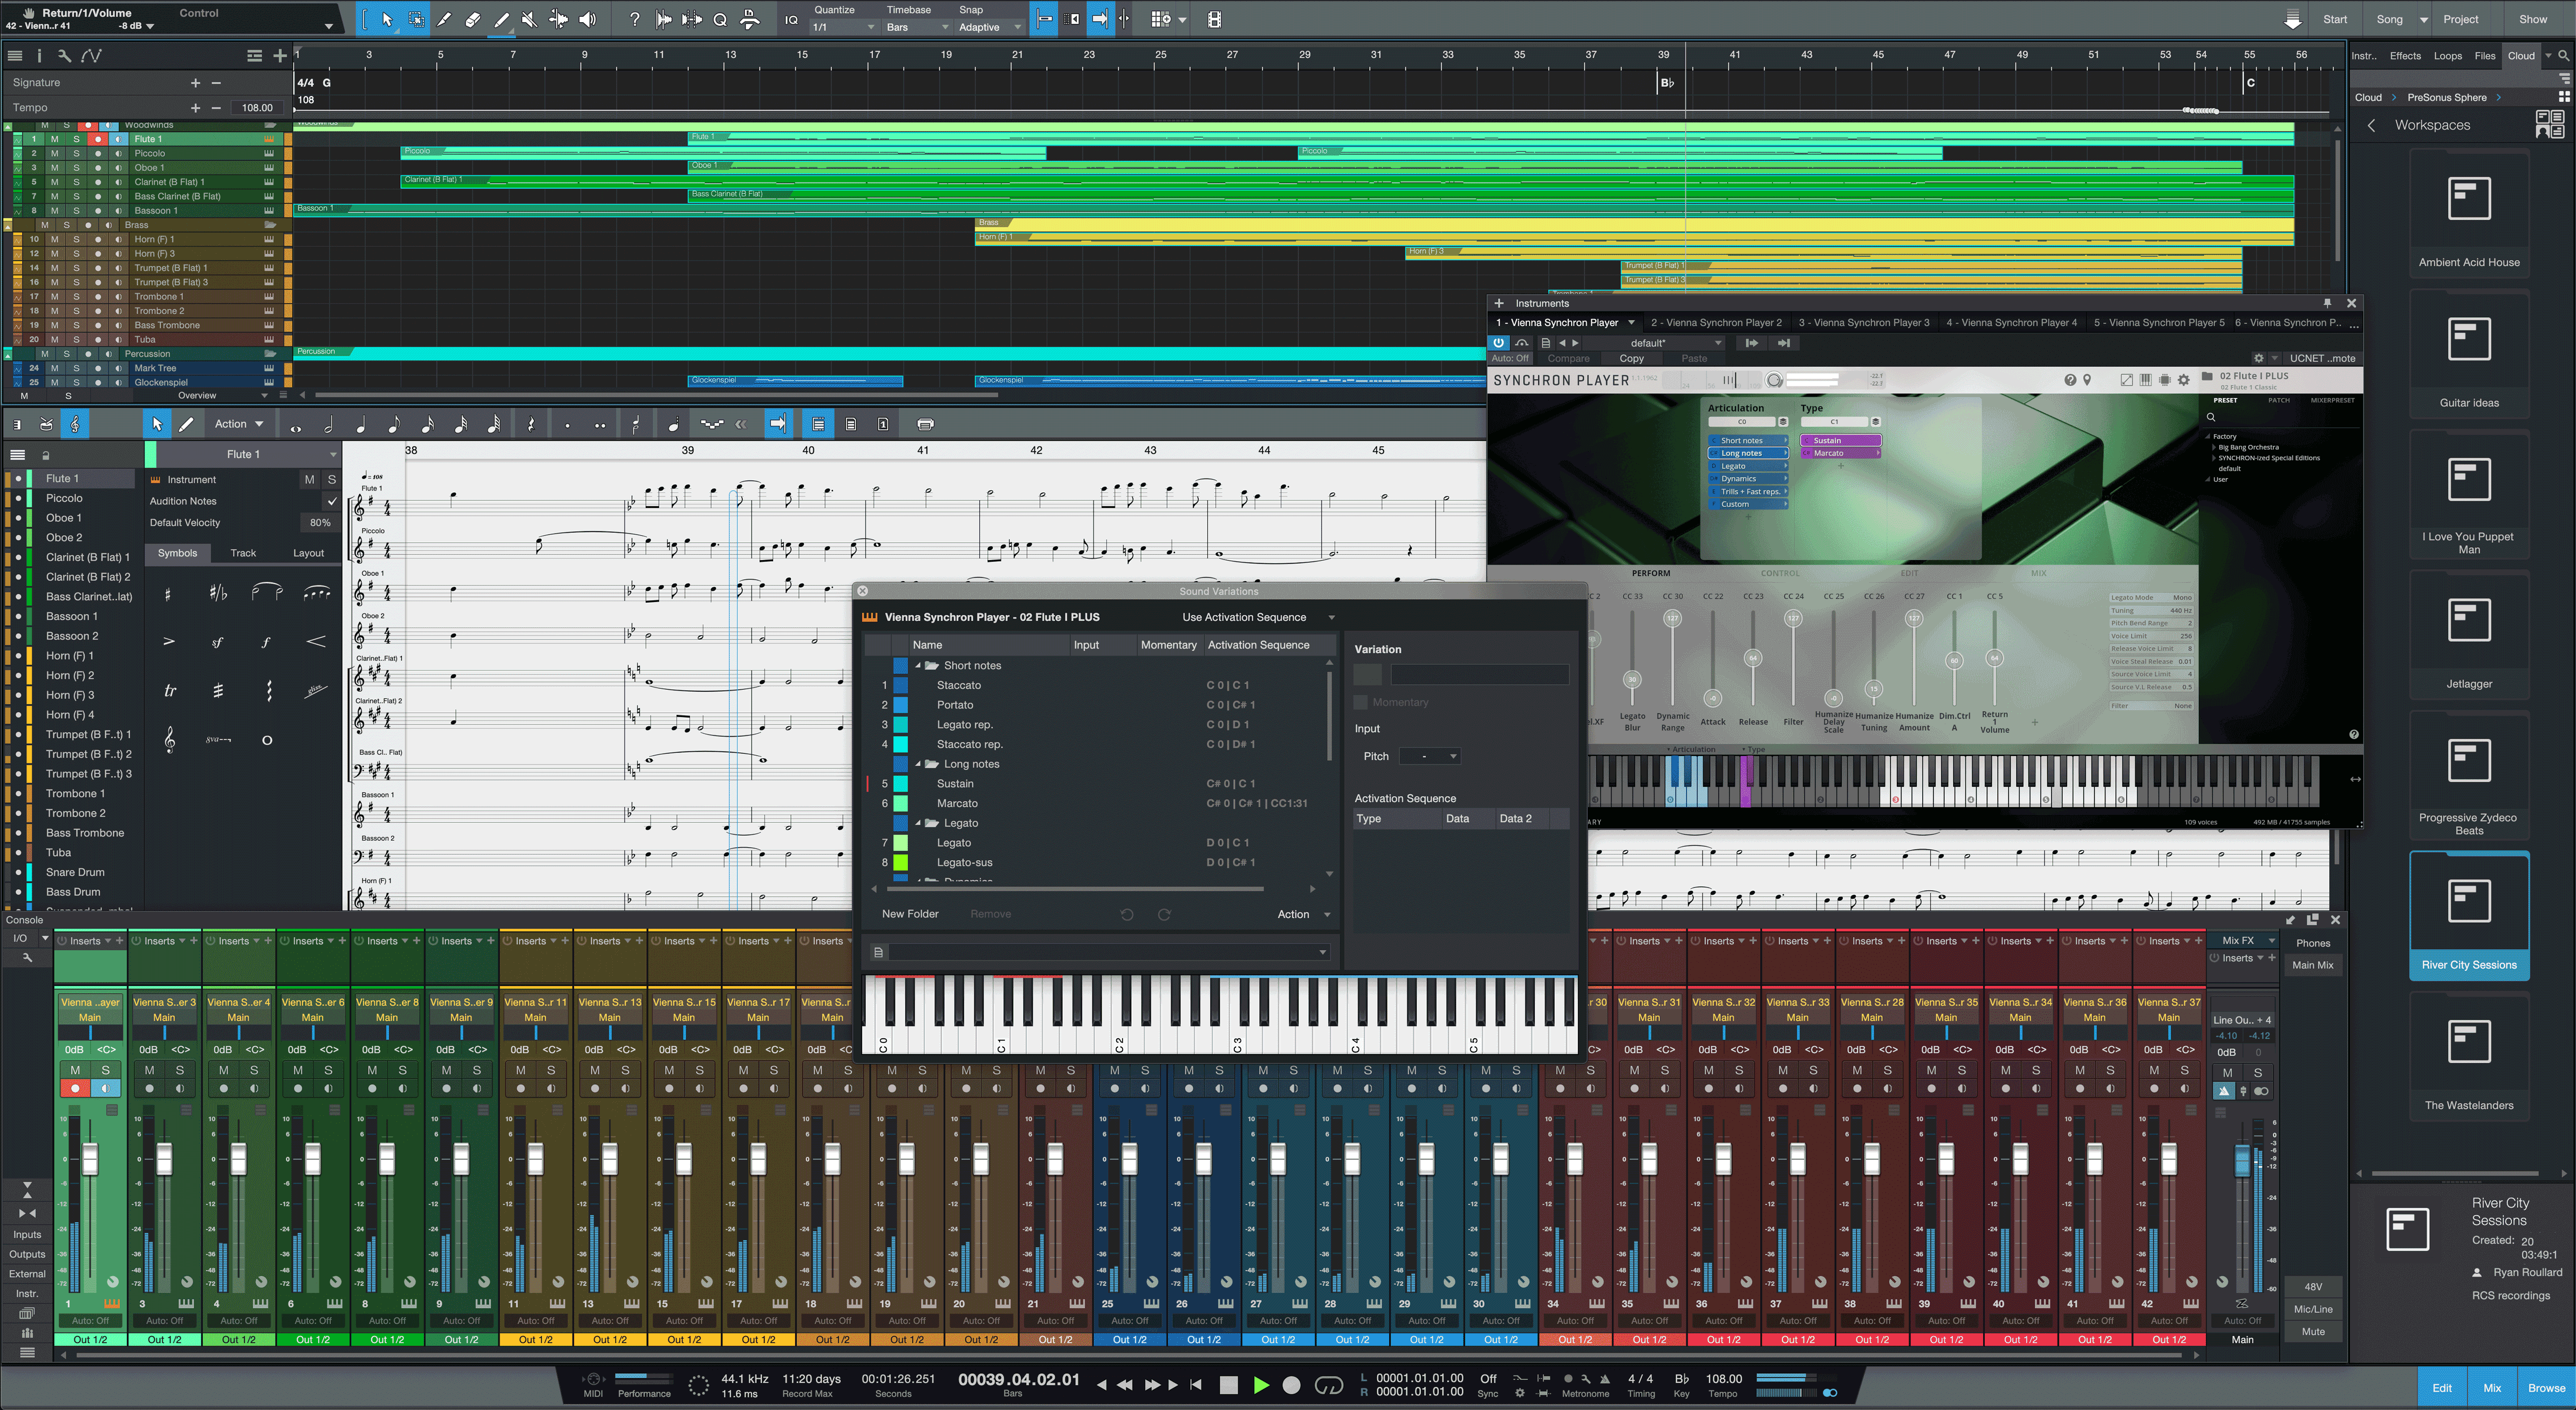 Get Ready For The New, Jam-Packed PreSonus Studio One 5 Update